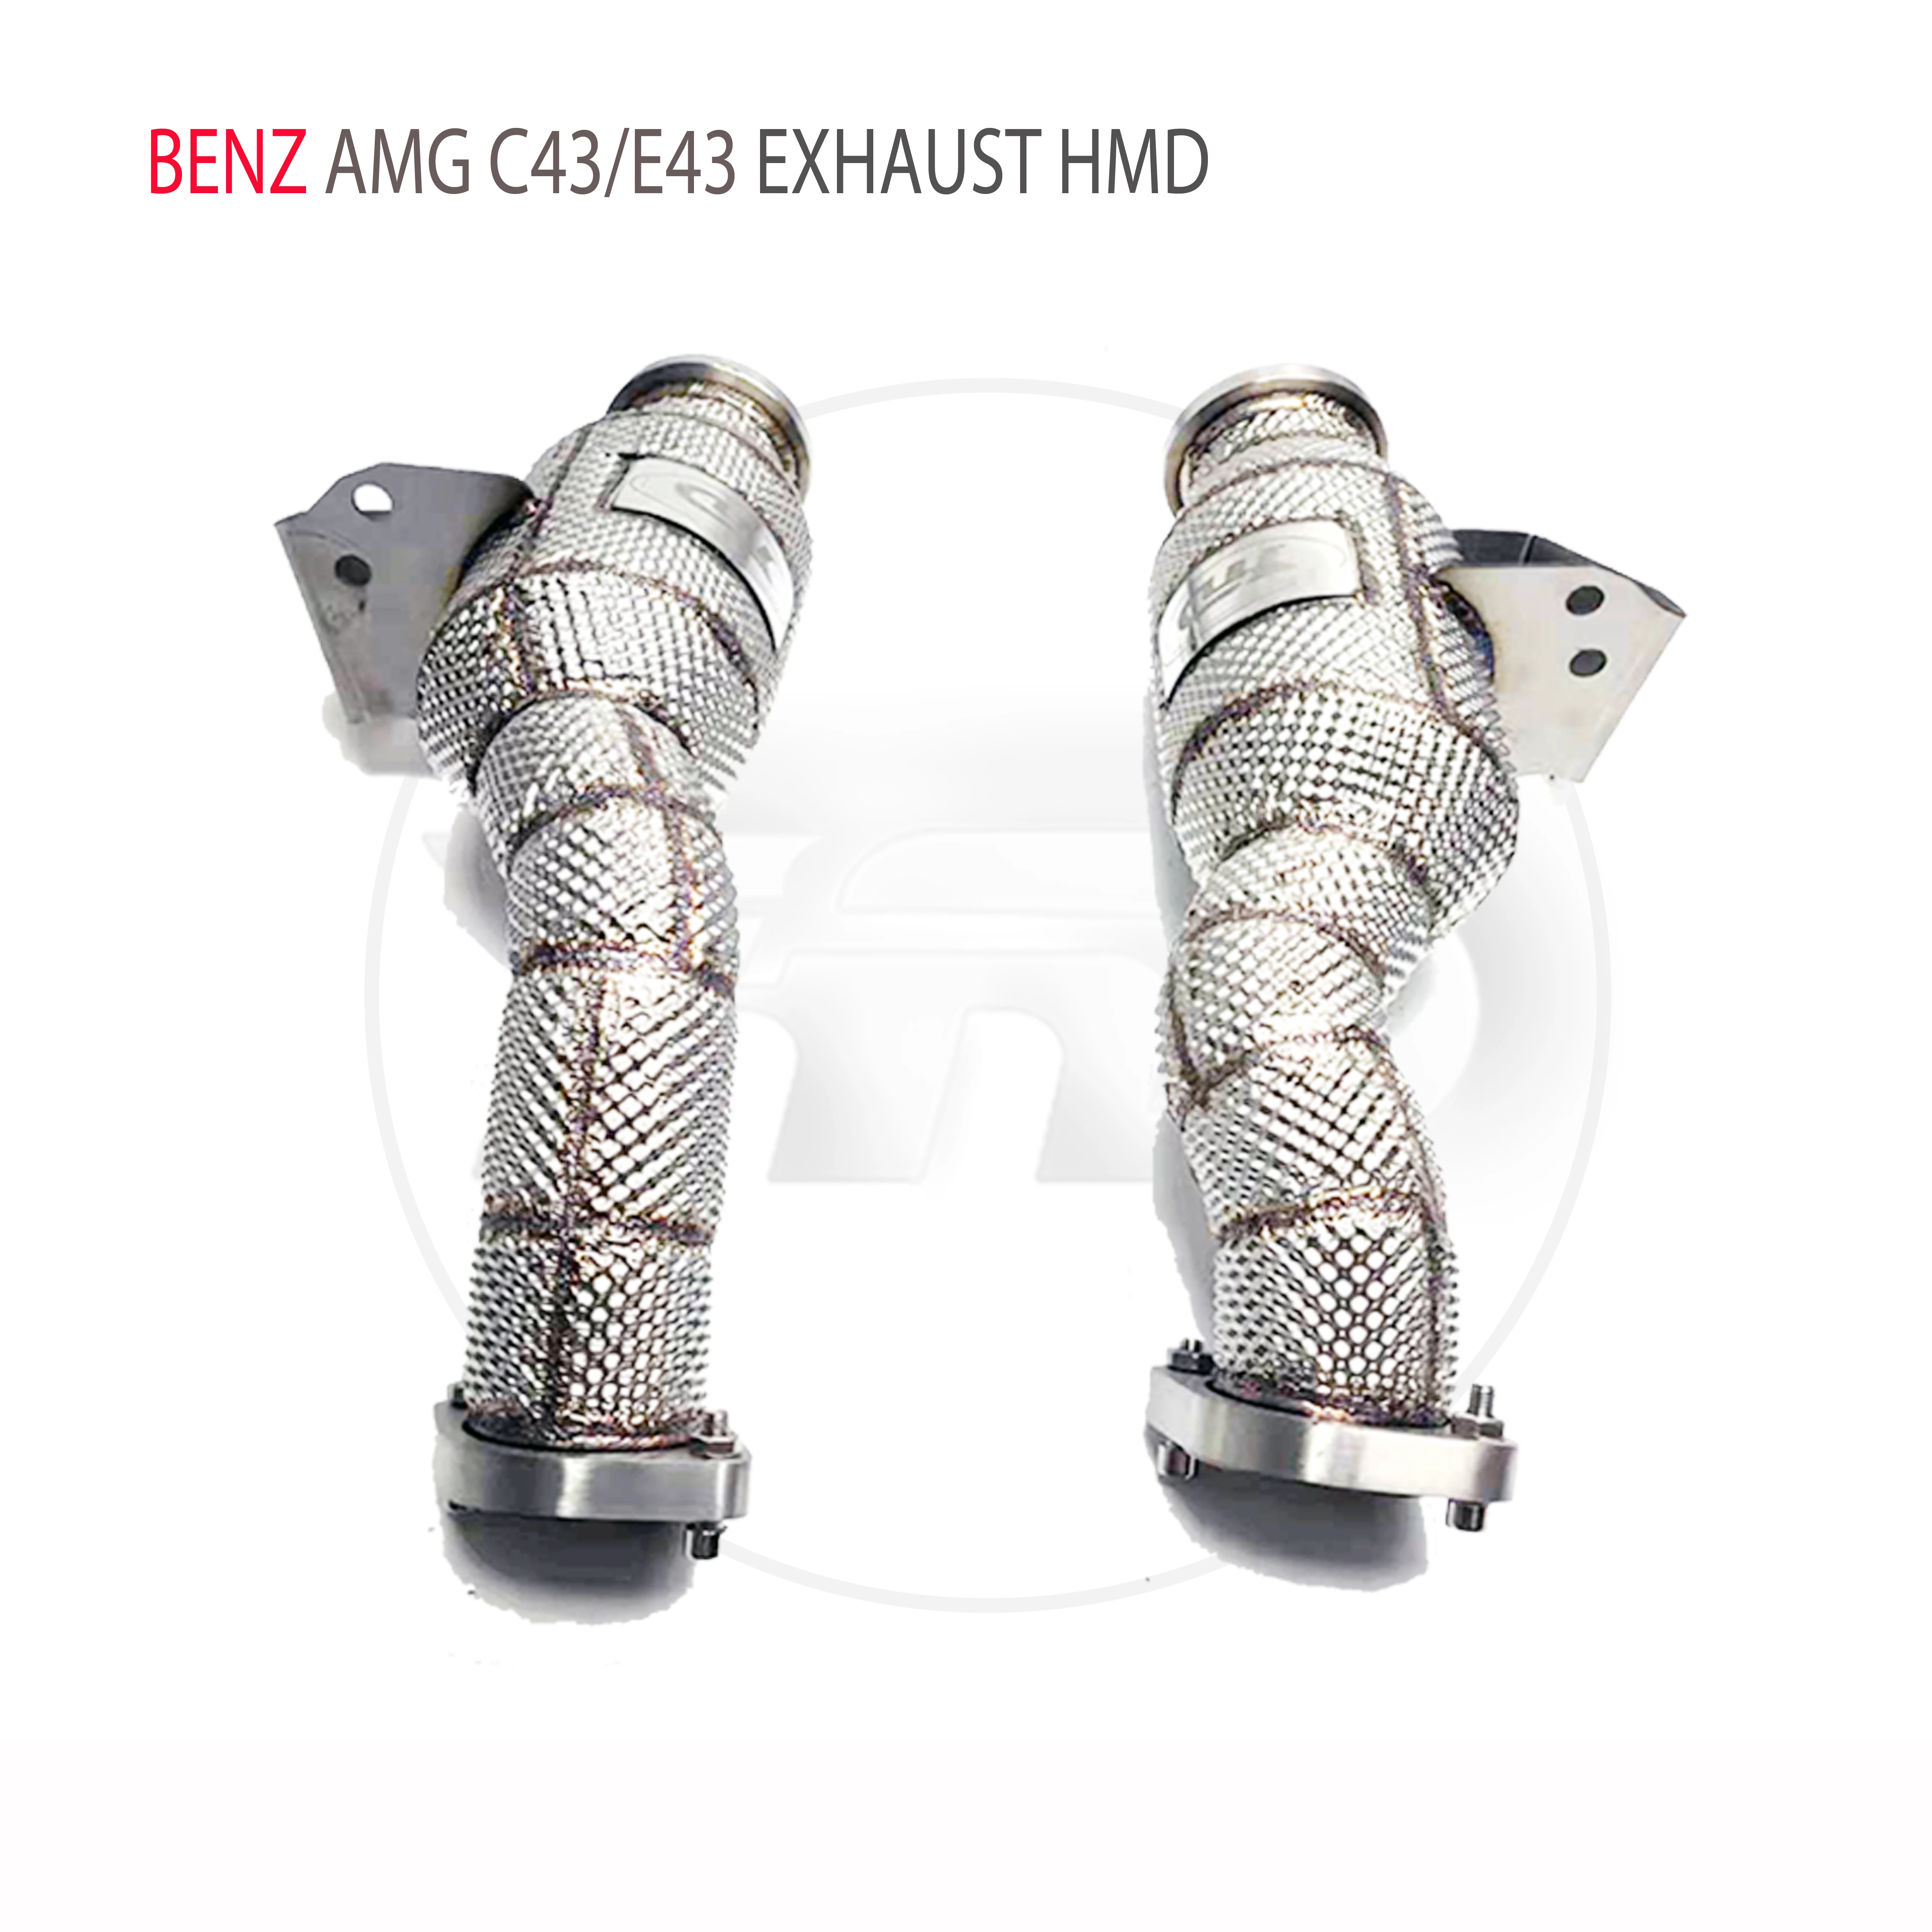 

HMD Exhaust Manifold Downpipe for Benz AMG C43 E43 E400 GLC43 Car Accessories With Catalytic Converter Header Without Cat Pipe